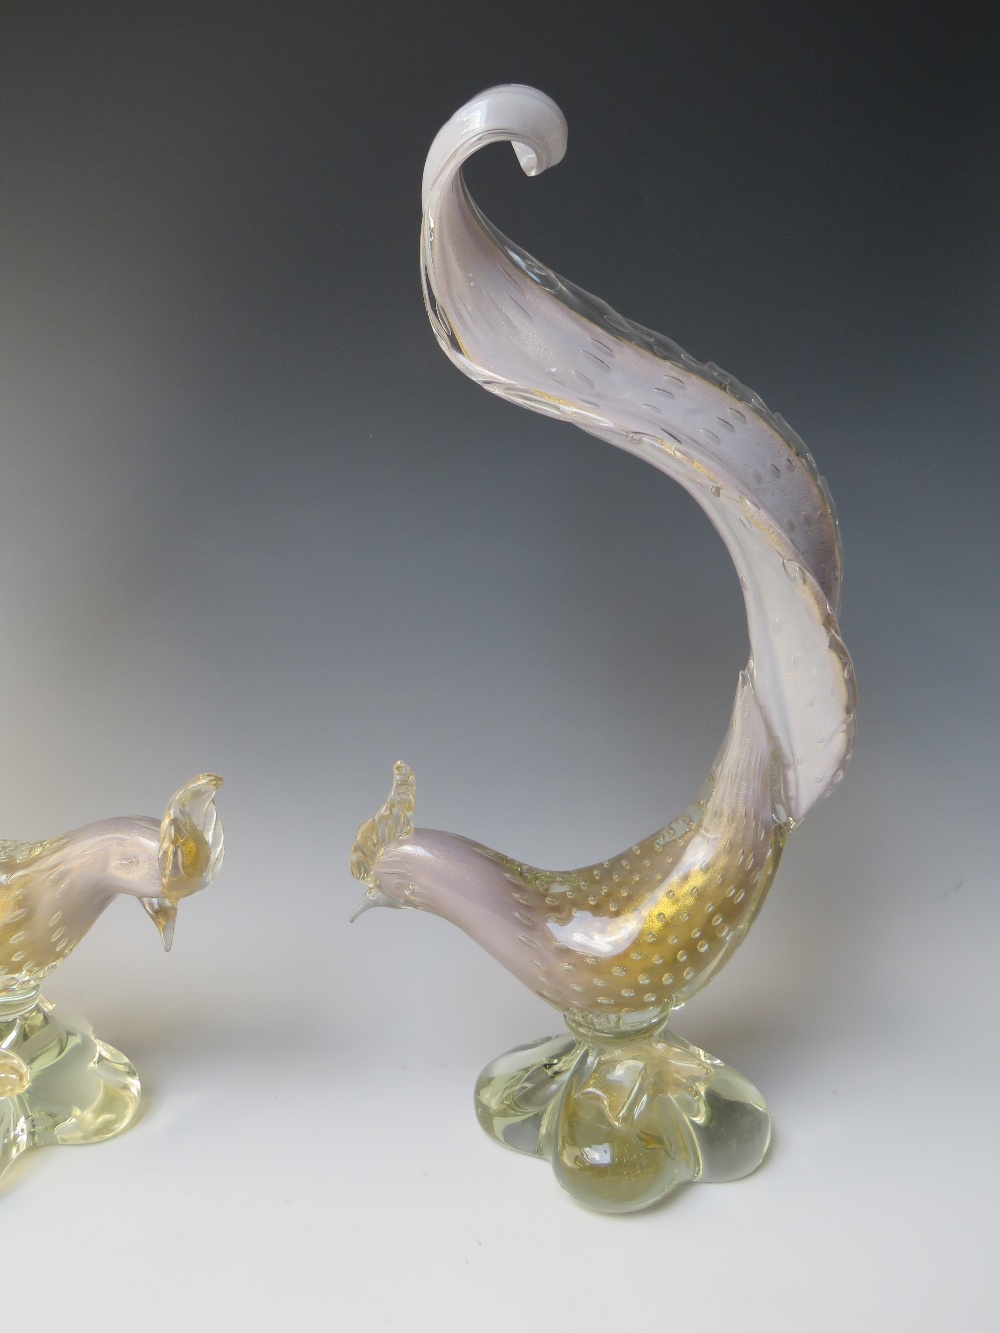 A PAIR OF MURANO BIRD OF PARADISE GLASS SCULPTURES, circa 1950, lilac and clear glass body with gold - Image 2 of 6